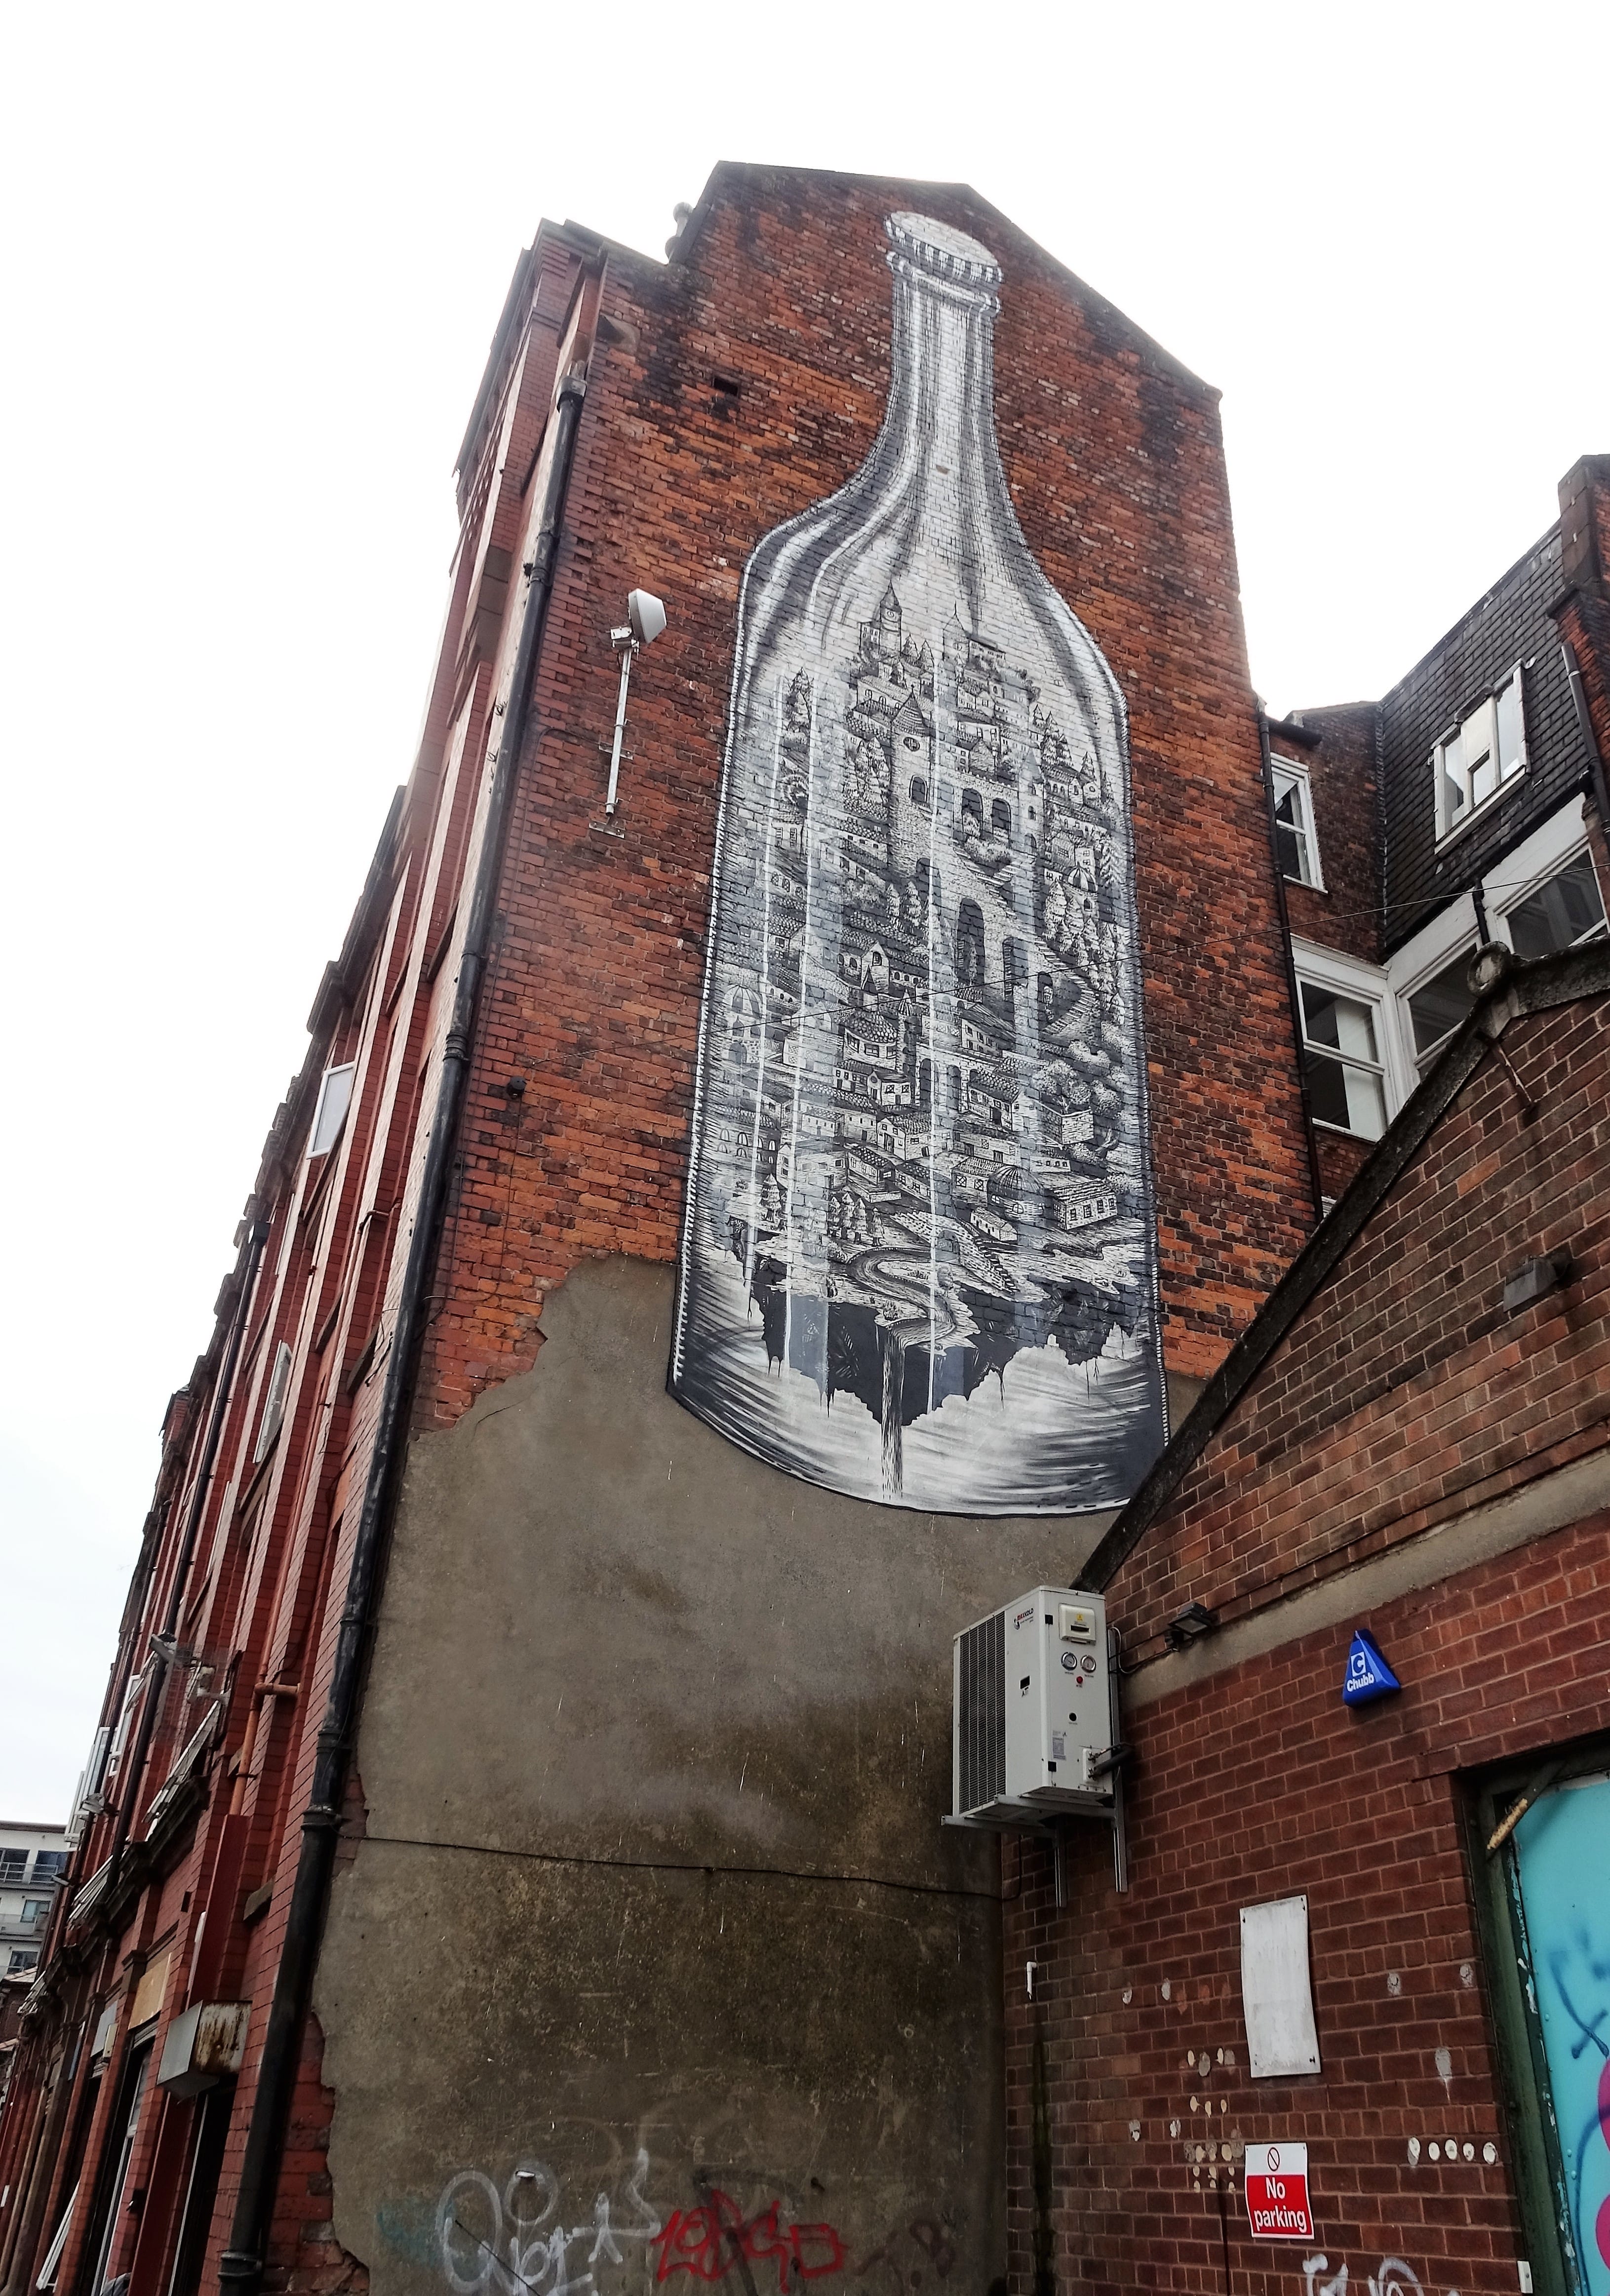 Graffiti 6460  by the artist PHLEGM captured by Mephisroth in manchester United Kingdom